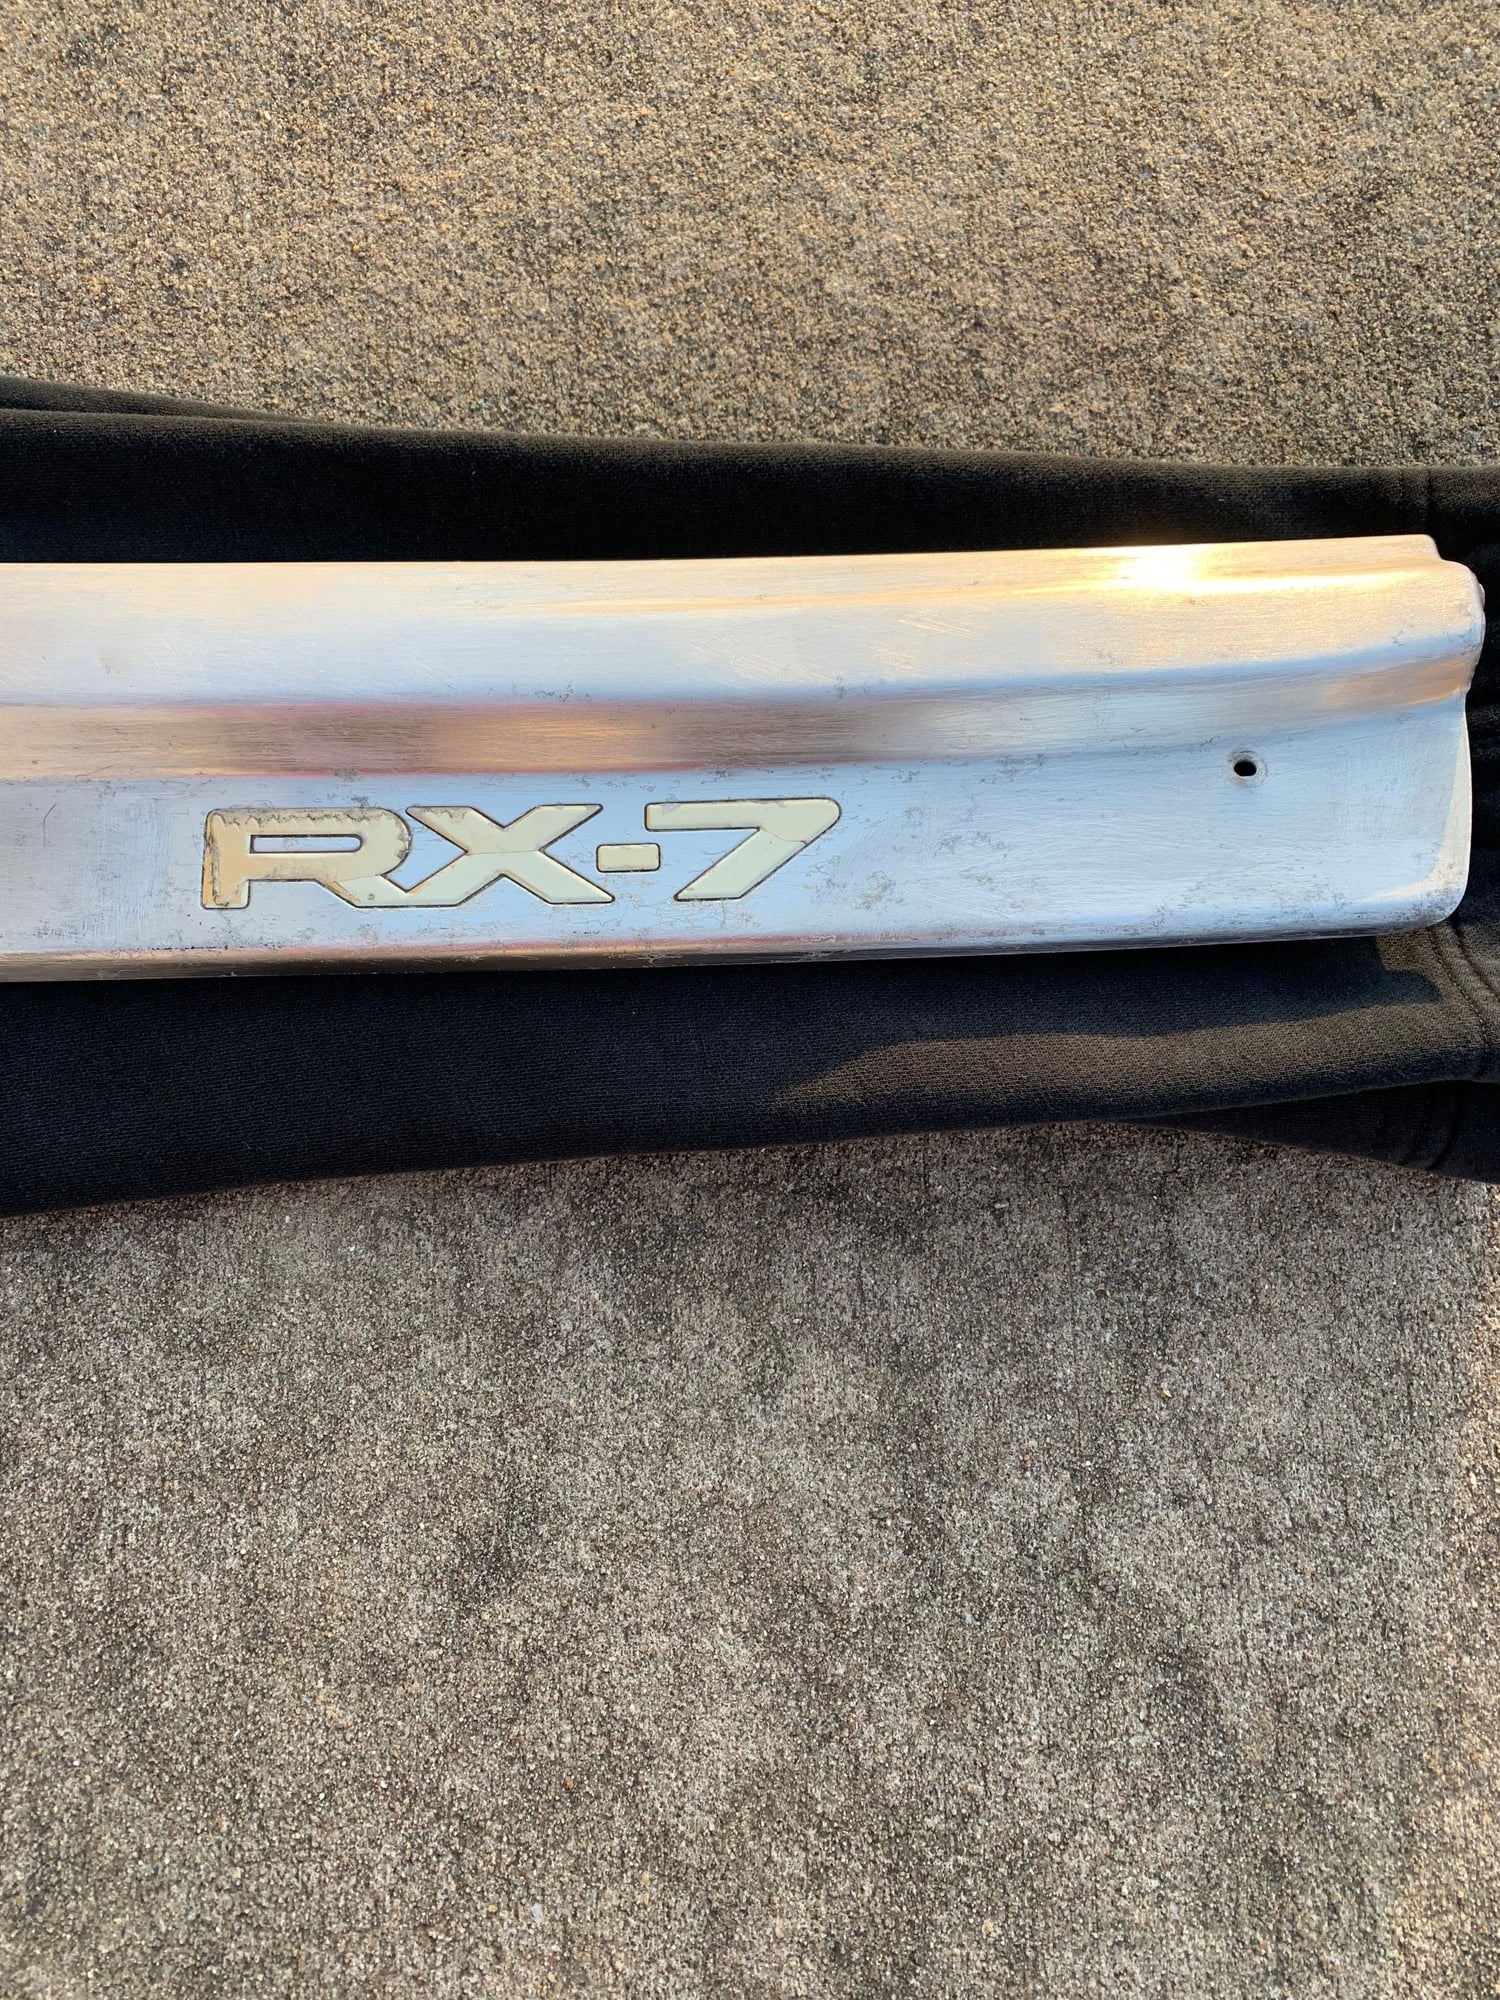 Interior/Upholstery - FD aluminum door sills, scuff plates - Used - 1993 to 1995 Mazda RX-7 - Florissant, MO 63031, United States